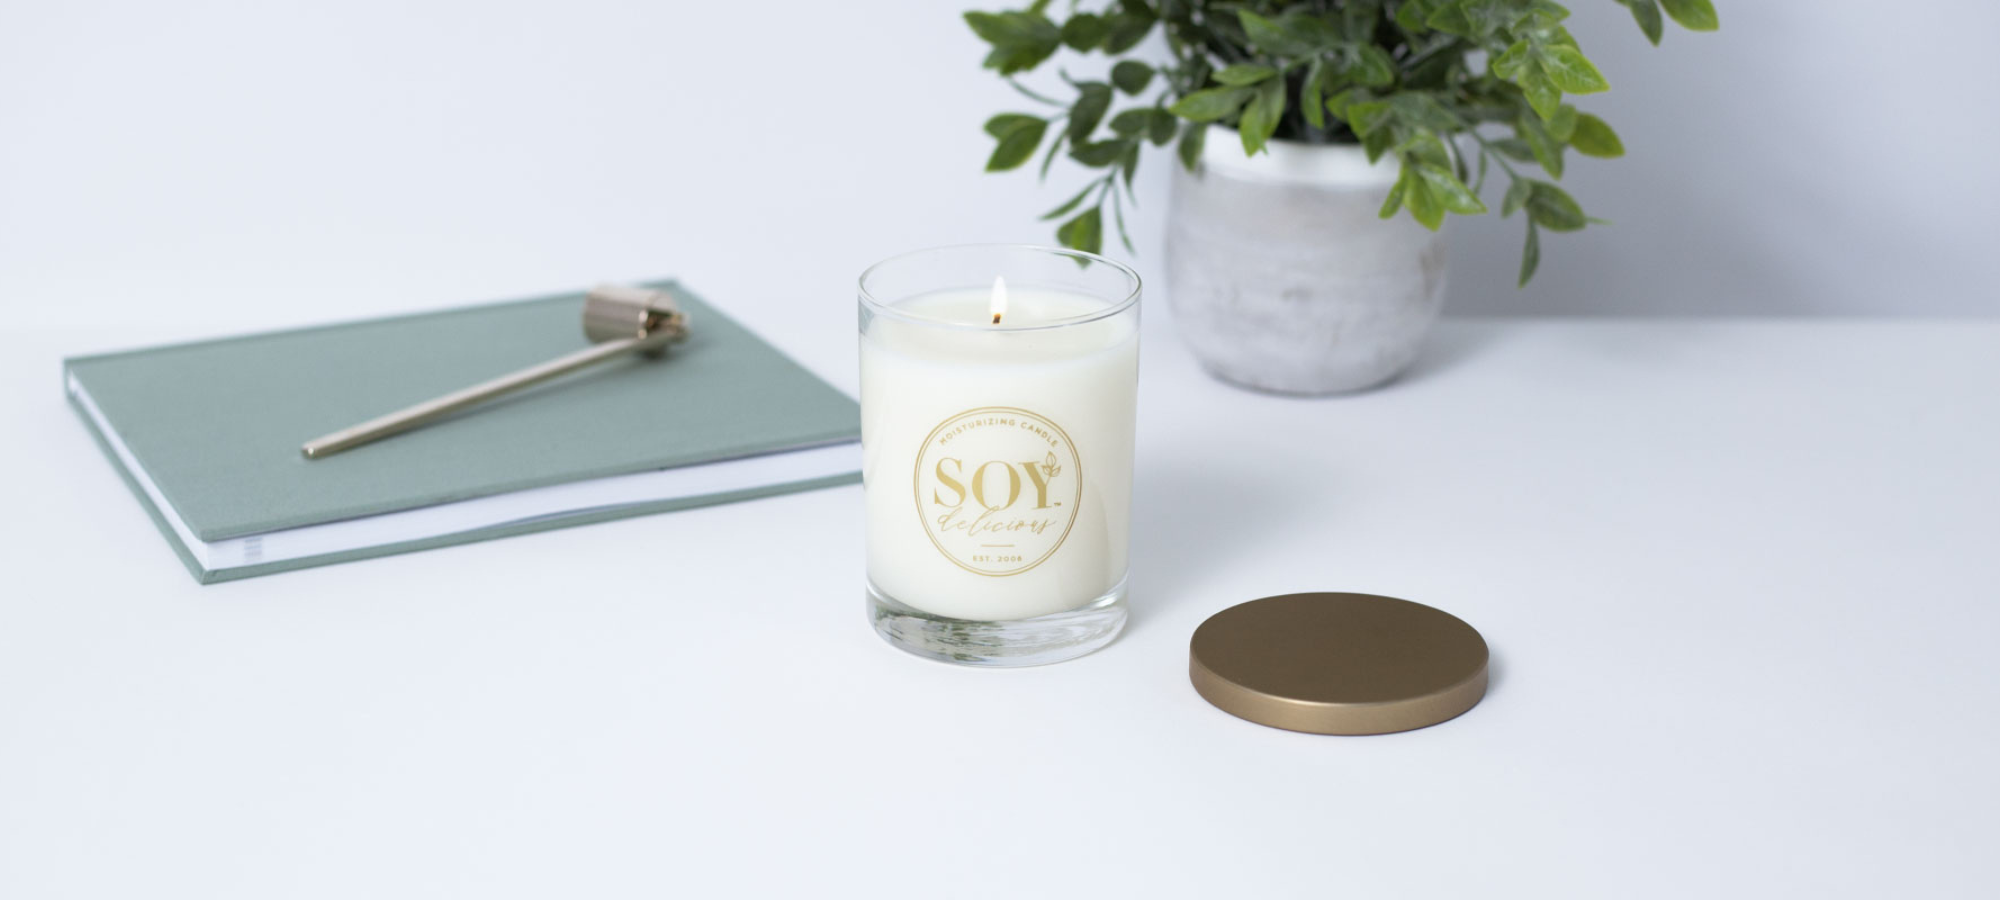 Cotton Wicks: Why They’re The Best Wick To Use For A Candle